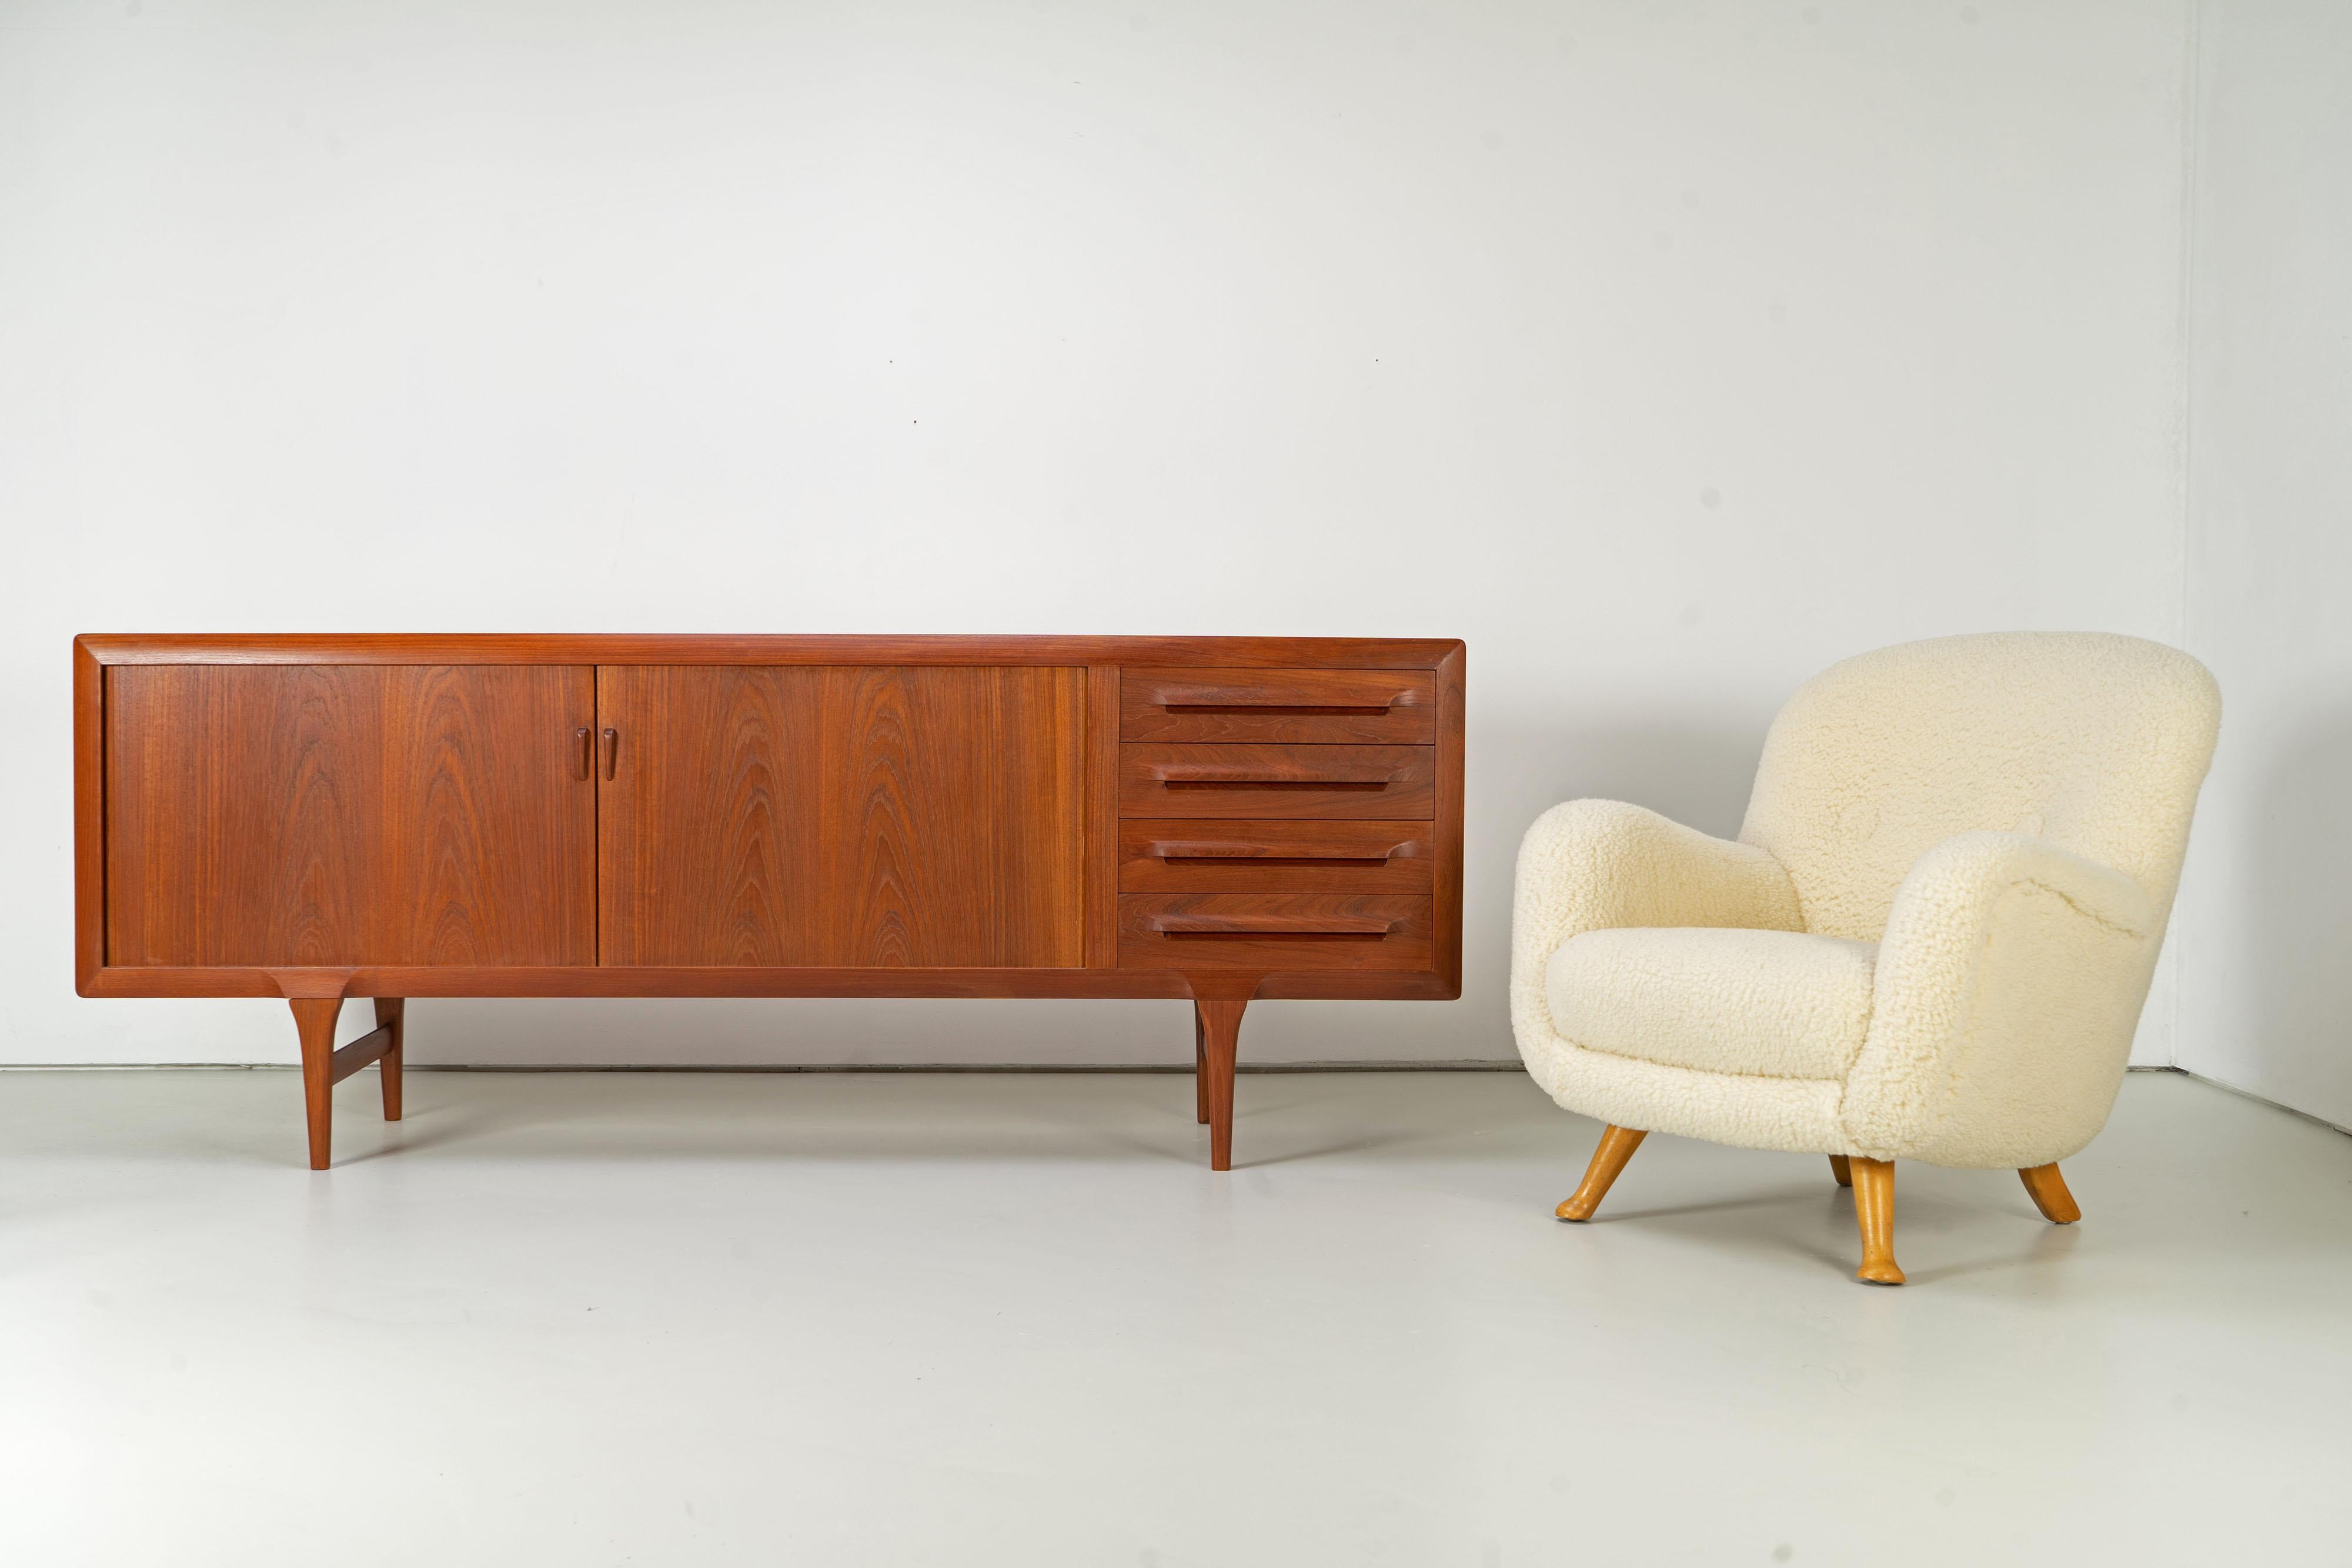 Mid-Century Modern sideboard by Ib Kofod-Larsen for the Danish furniture manufacturer Faarup. The sideboard features tambour doors and is veneered on all sides, thus it could be used as a roomdivider. It is in very good condition with slight signs